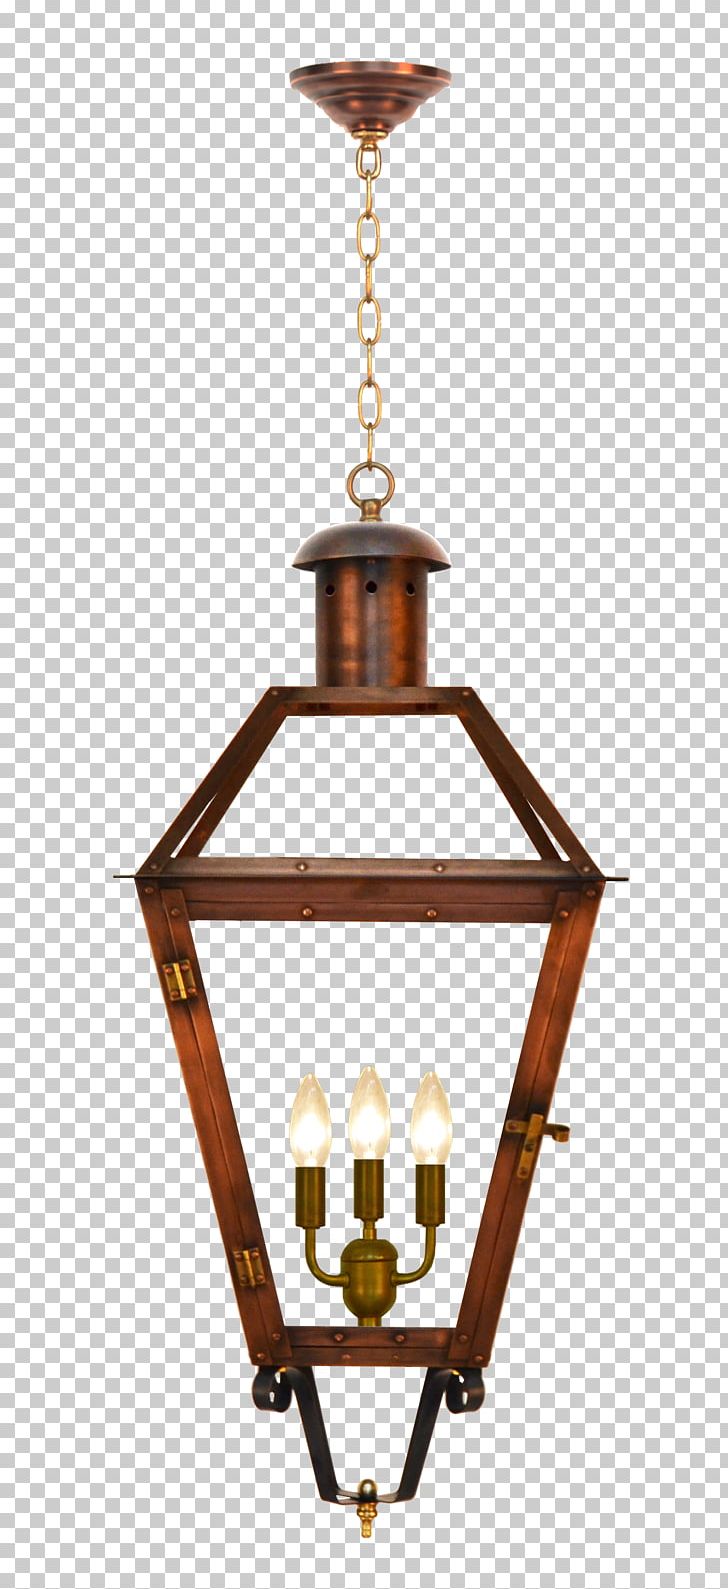 Gas Lighting Lantern Light Fixture Sconce PNG, Clipart, Candle Holder, Ceiling Fixture, Chandelier, Coppersmith, Electricity Free PNG Download